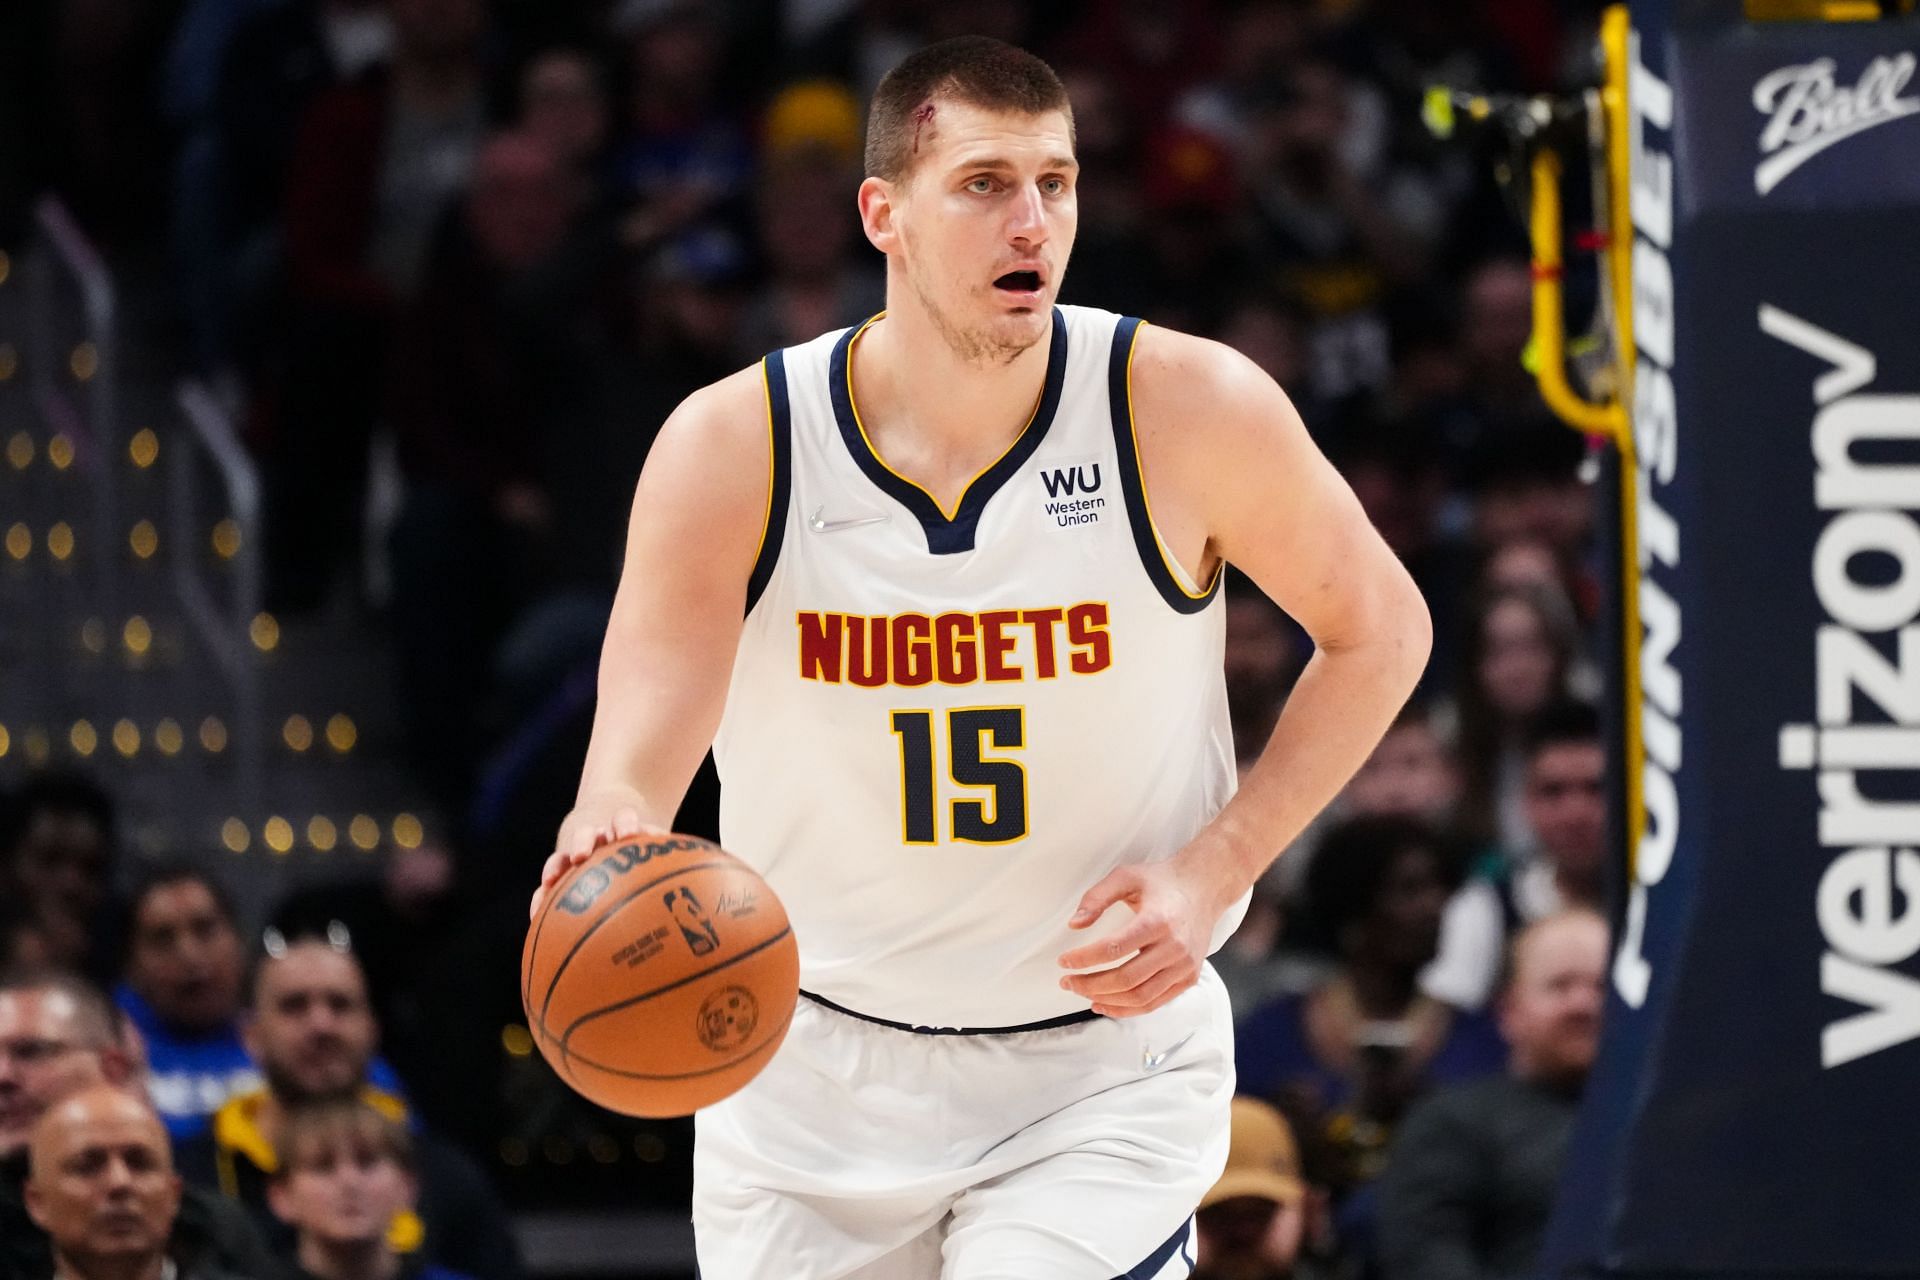 The Denver Nuggets continue to be heavily reliant on Nikola Jokic